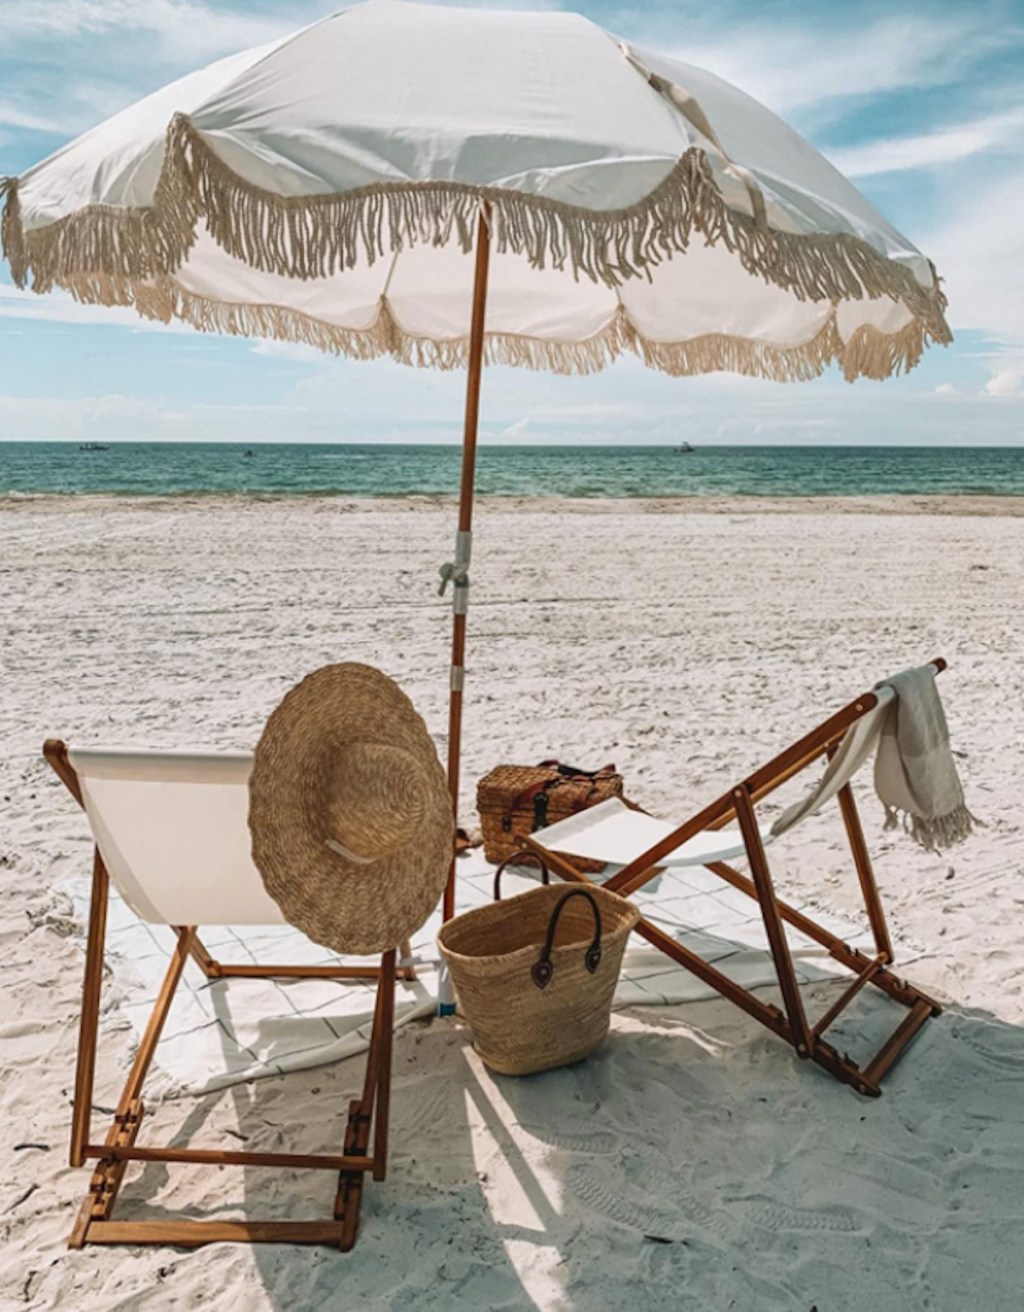 wood and white sling chairs on beach with tassel beach umbrella